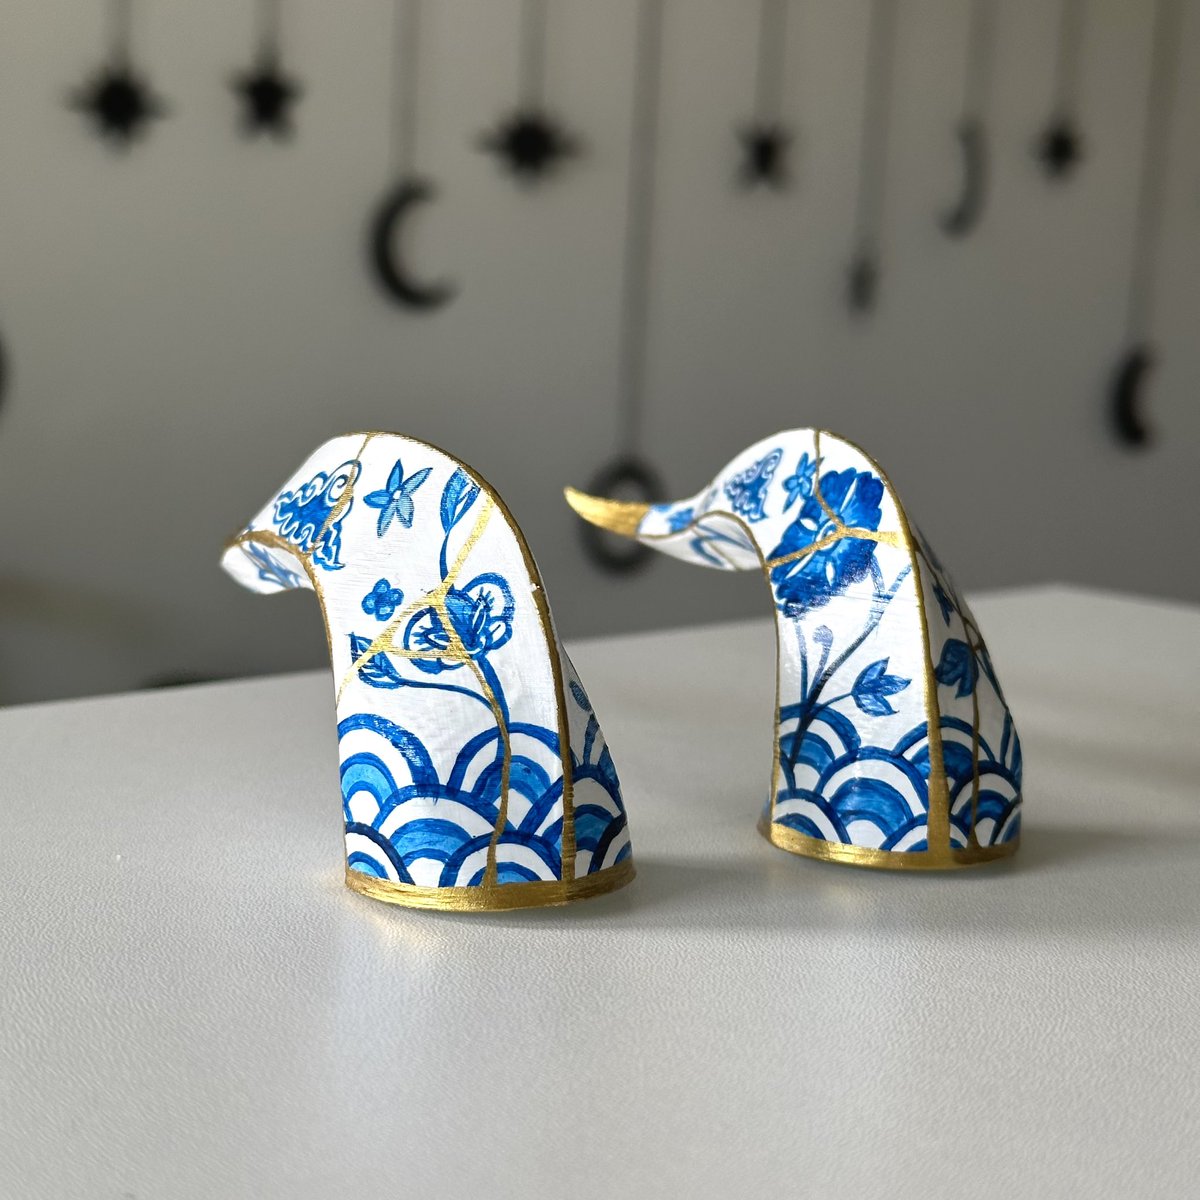 Kintsugi horns ✨💙

PLA 3D printed and painted by me!🖌️
I hope you like them 🥰